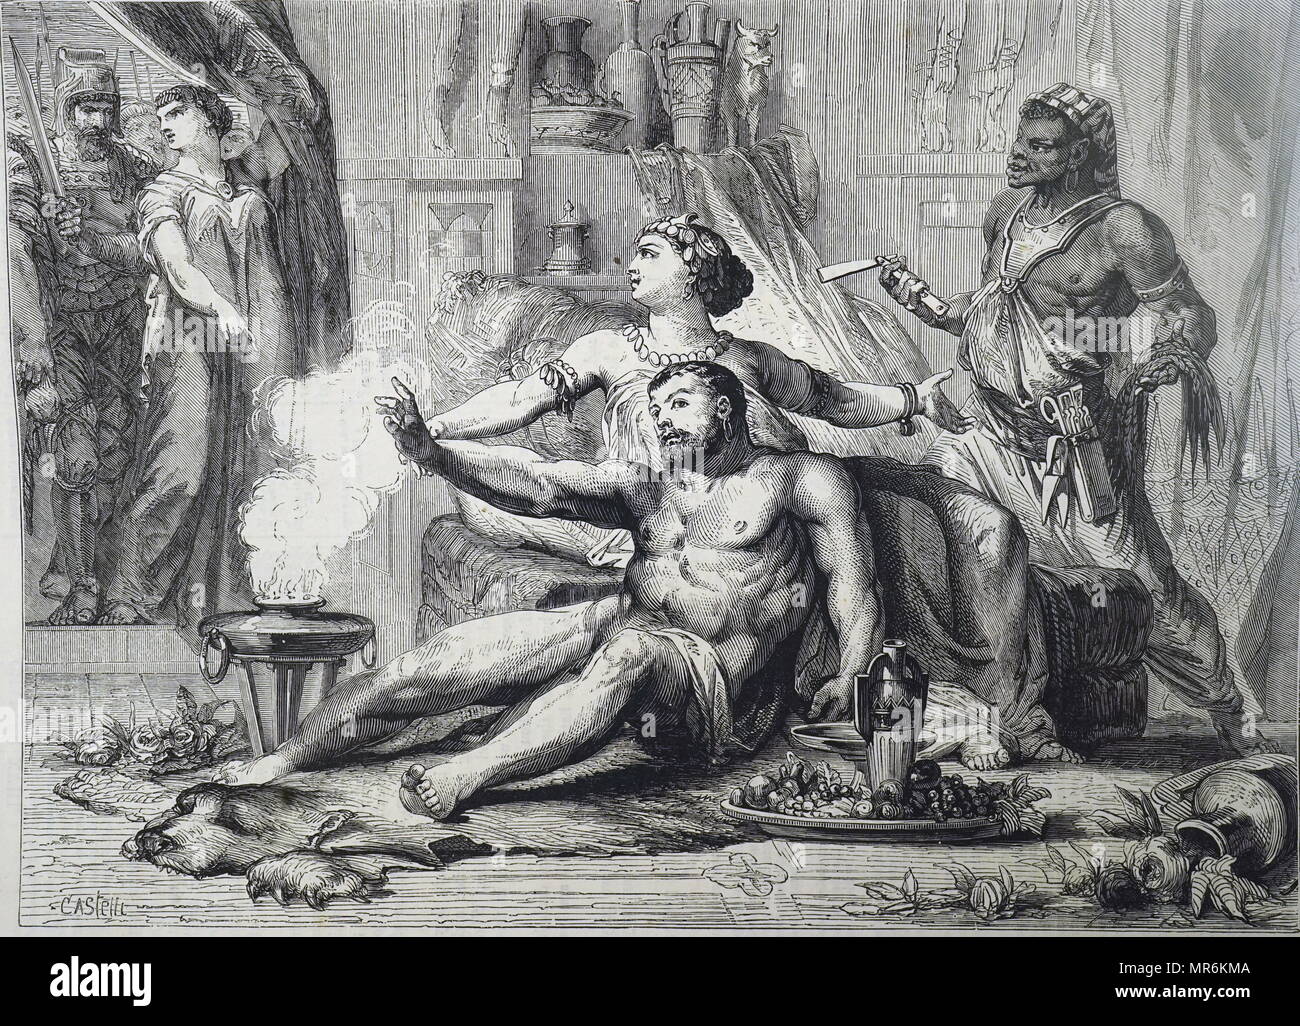 Engraving depicting Samson being betrayed to the Philistines by Delilah. His enormous strength left him with the loss of his hair. Dated 19th century Stock Photo